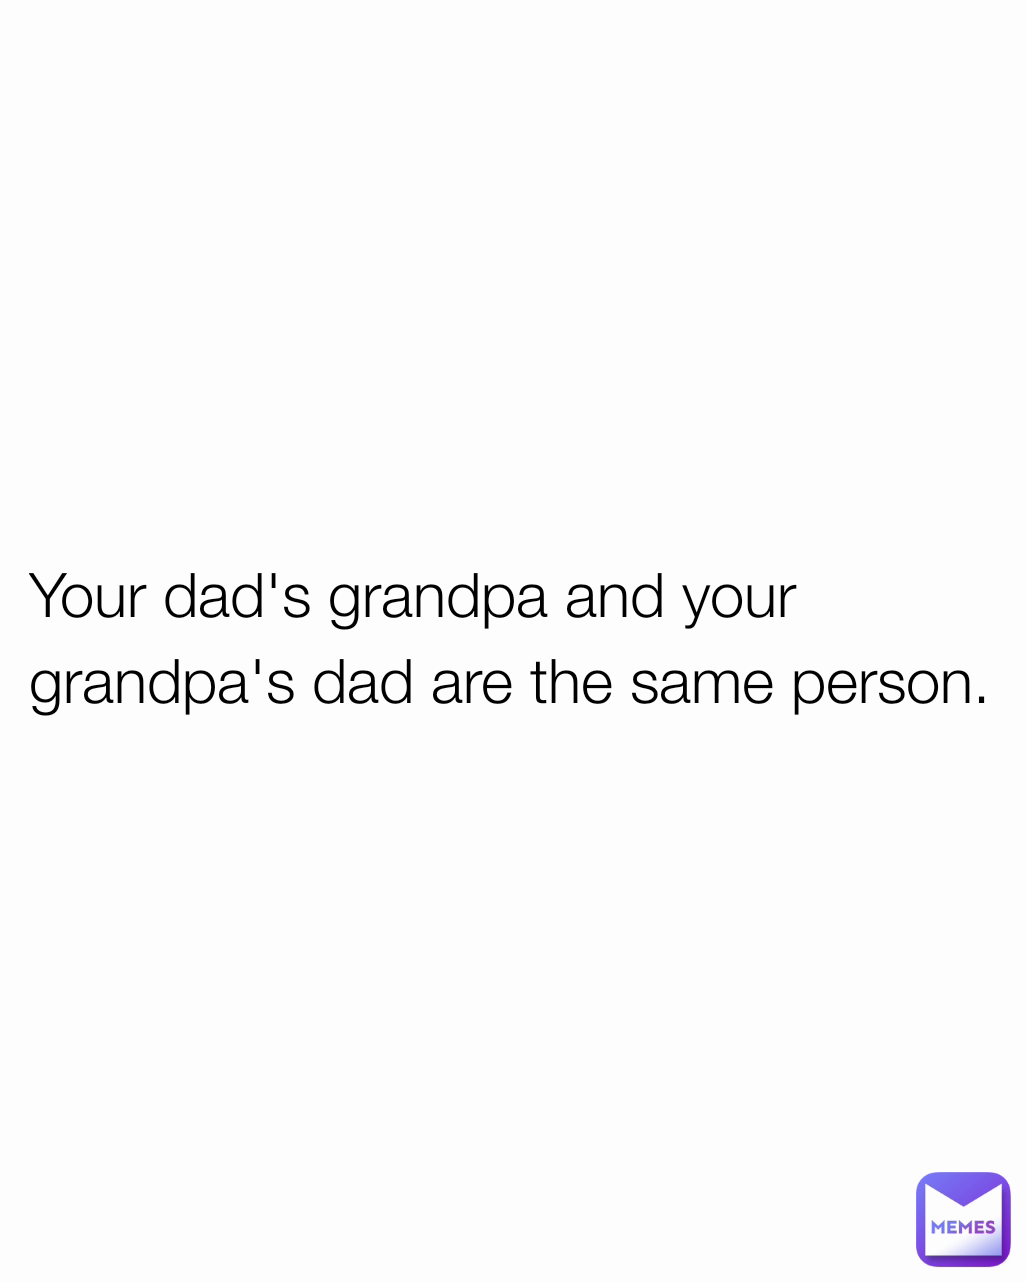 Your dad's grandpa and your grandpa's dad are the same person.